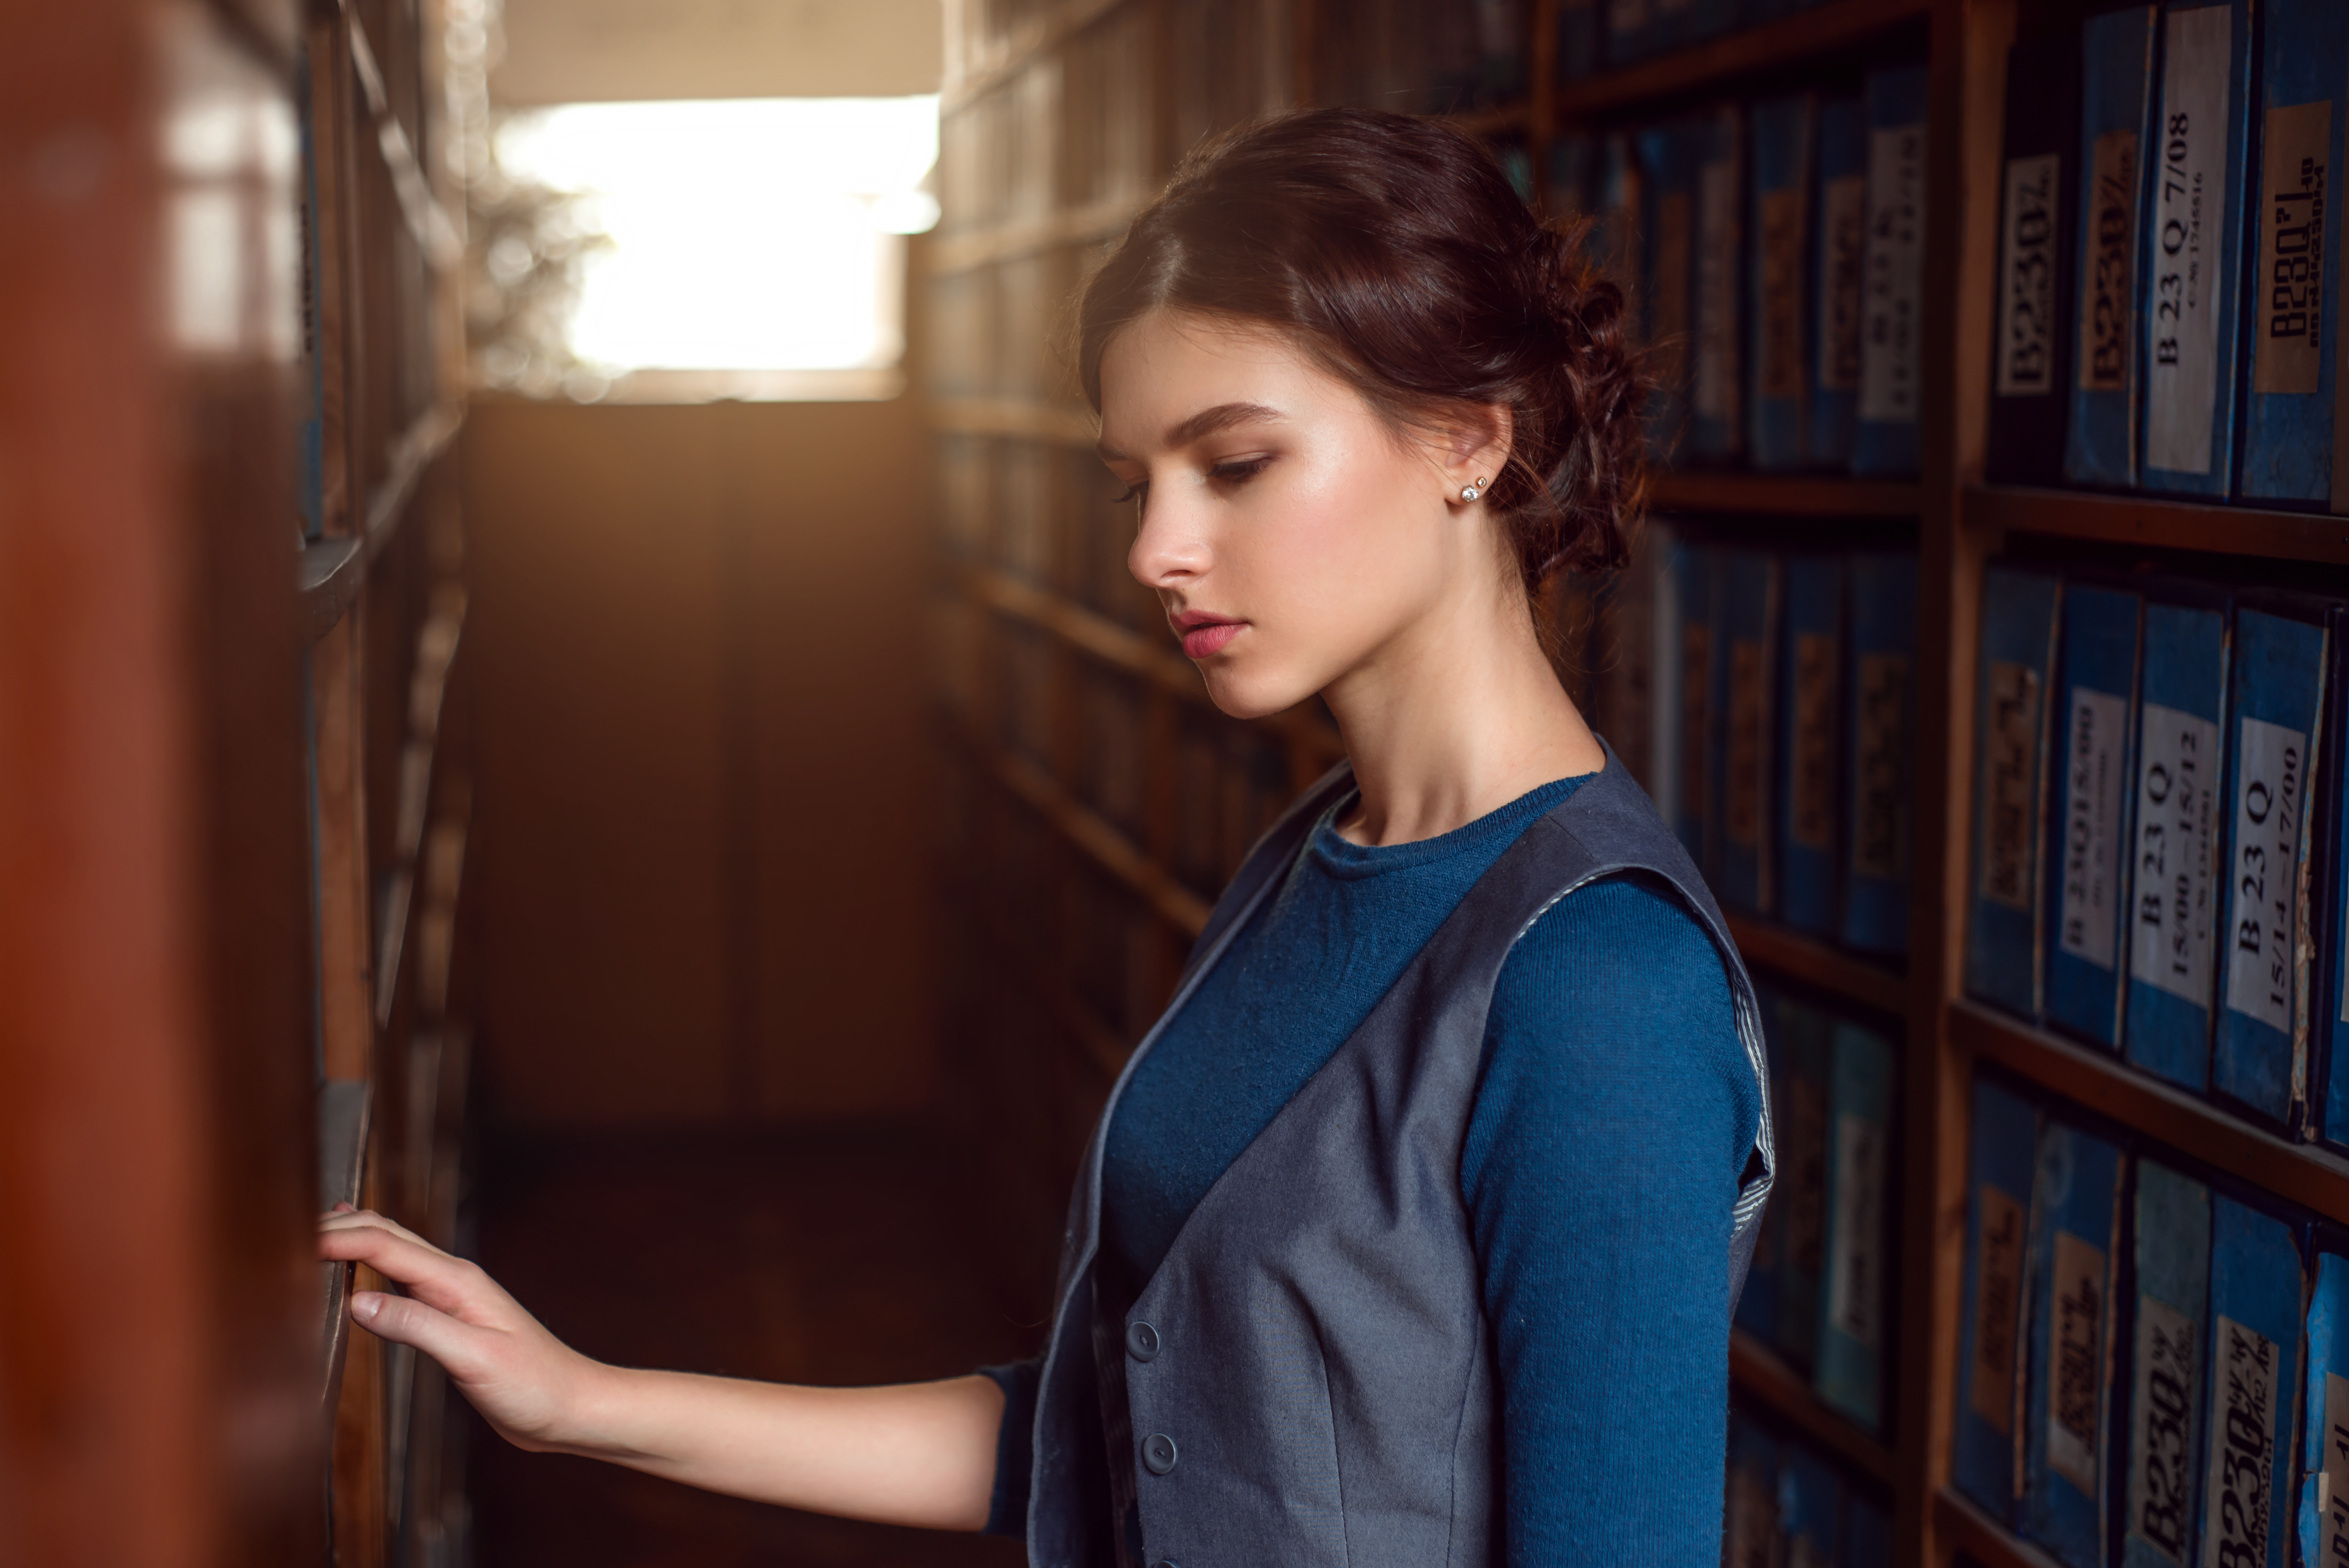 Young woman selecting book from library shelf.